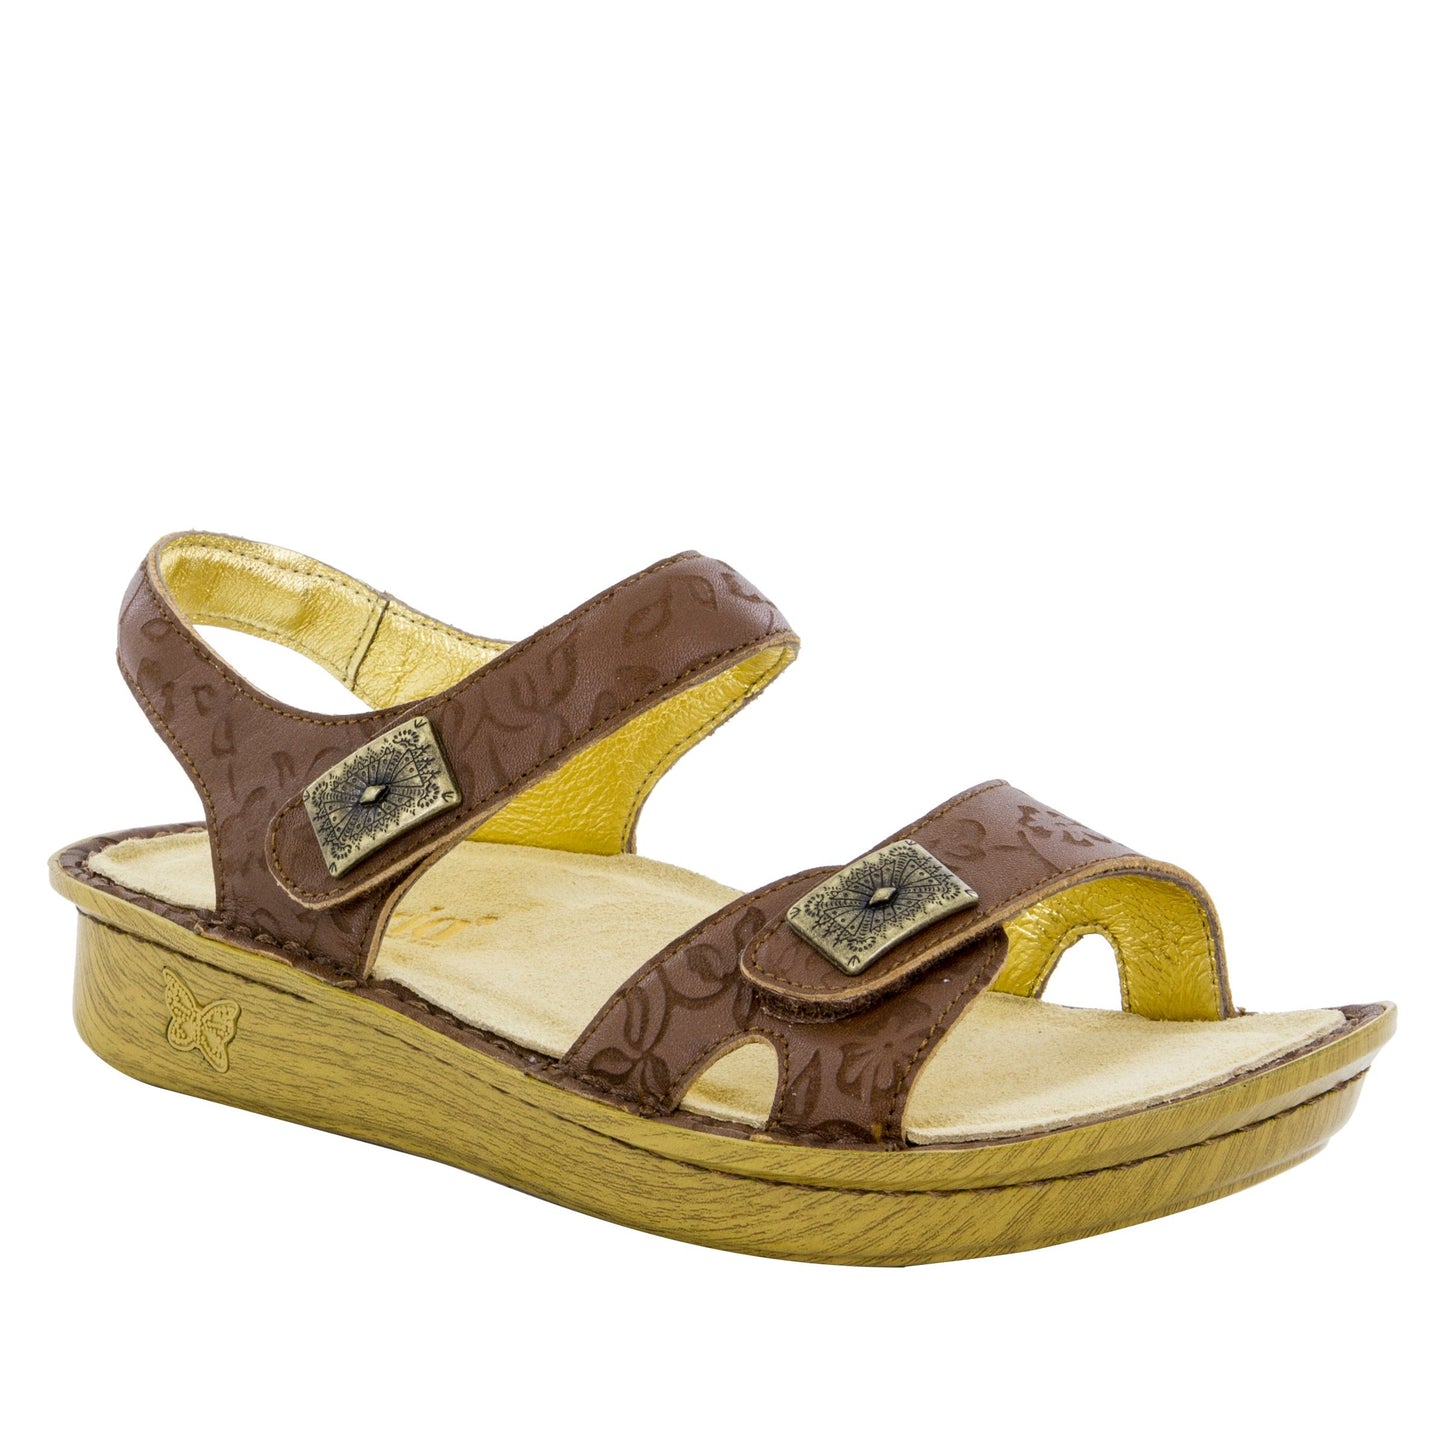 Alegria Sale Shoe Size 36 Vienna Sandal in Morning Glory Tan at Parker's Clothing and Shoes.